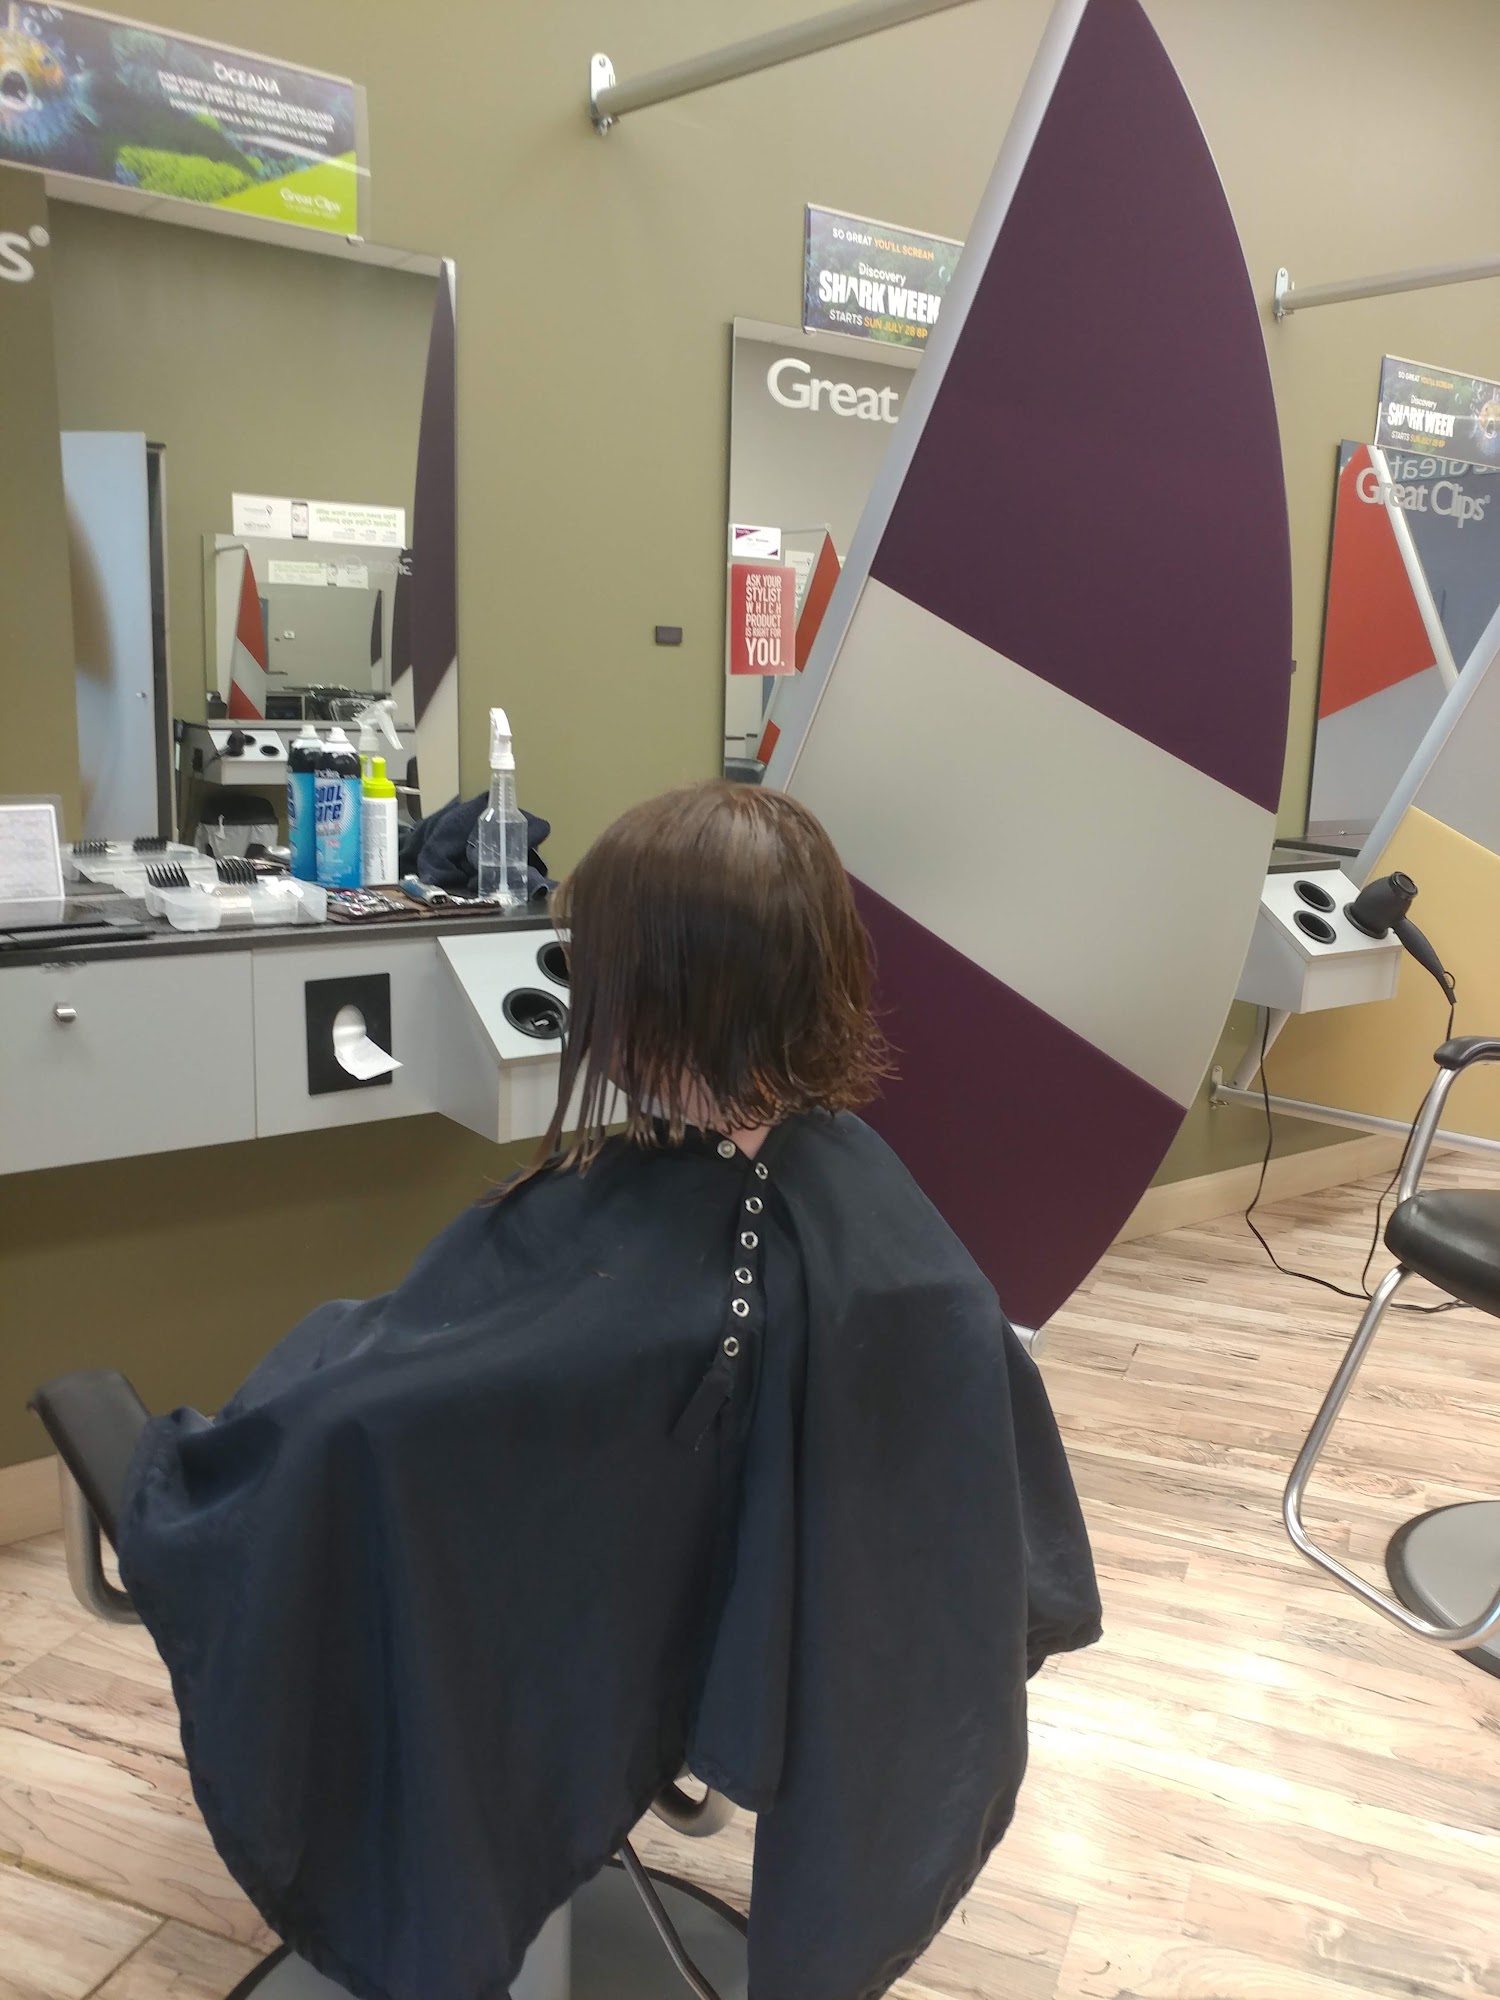 Great Clips 9630 Transit Rd Ste 700, East Amherst New York 14051